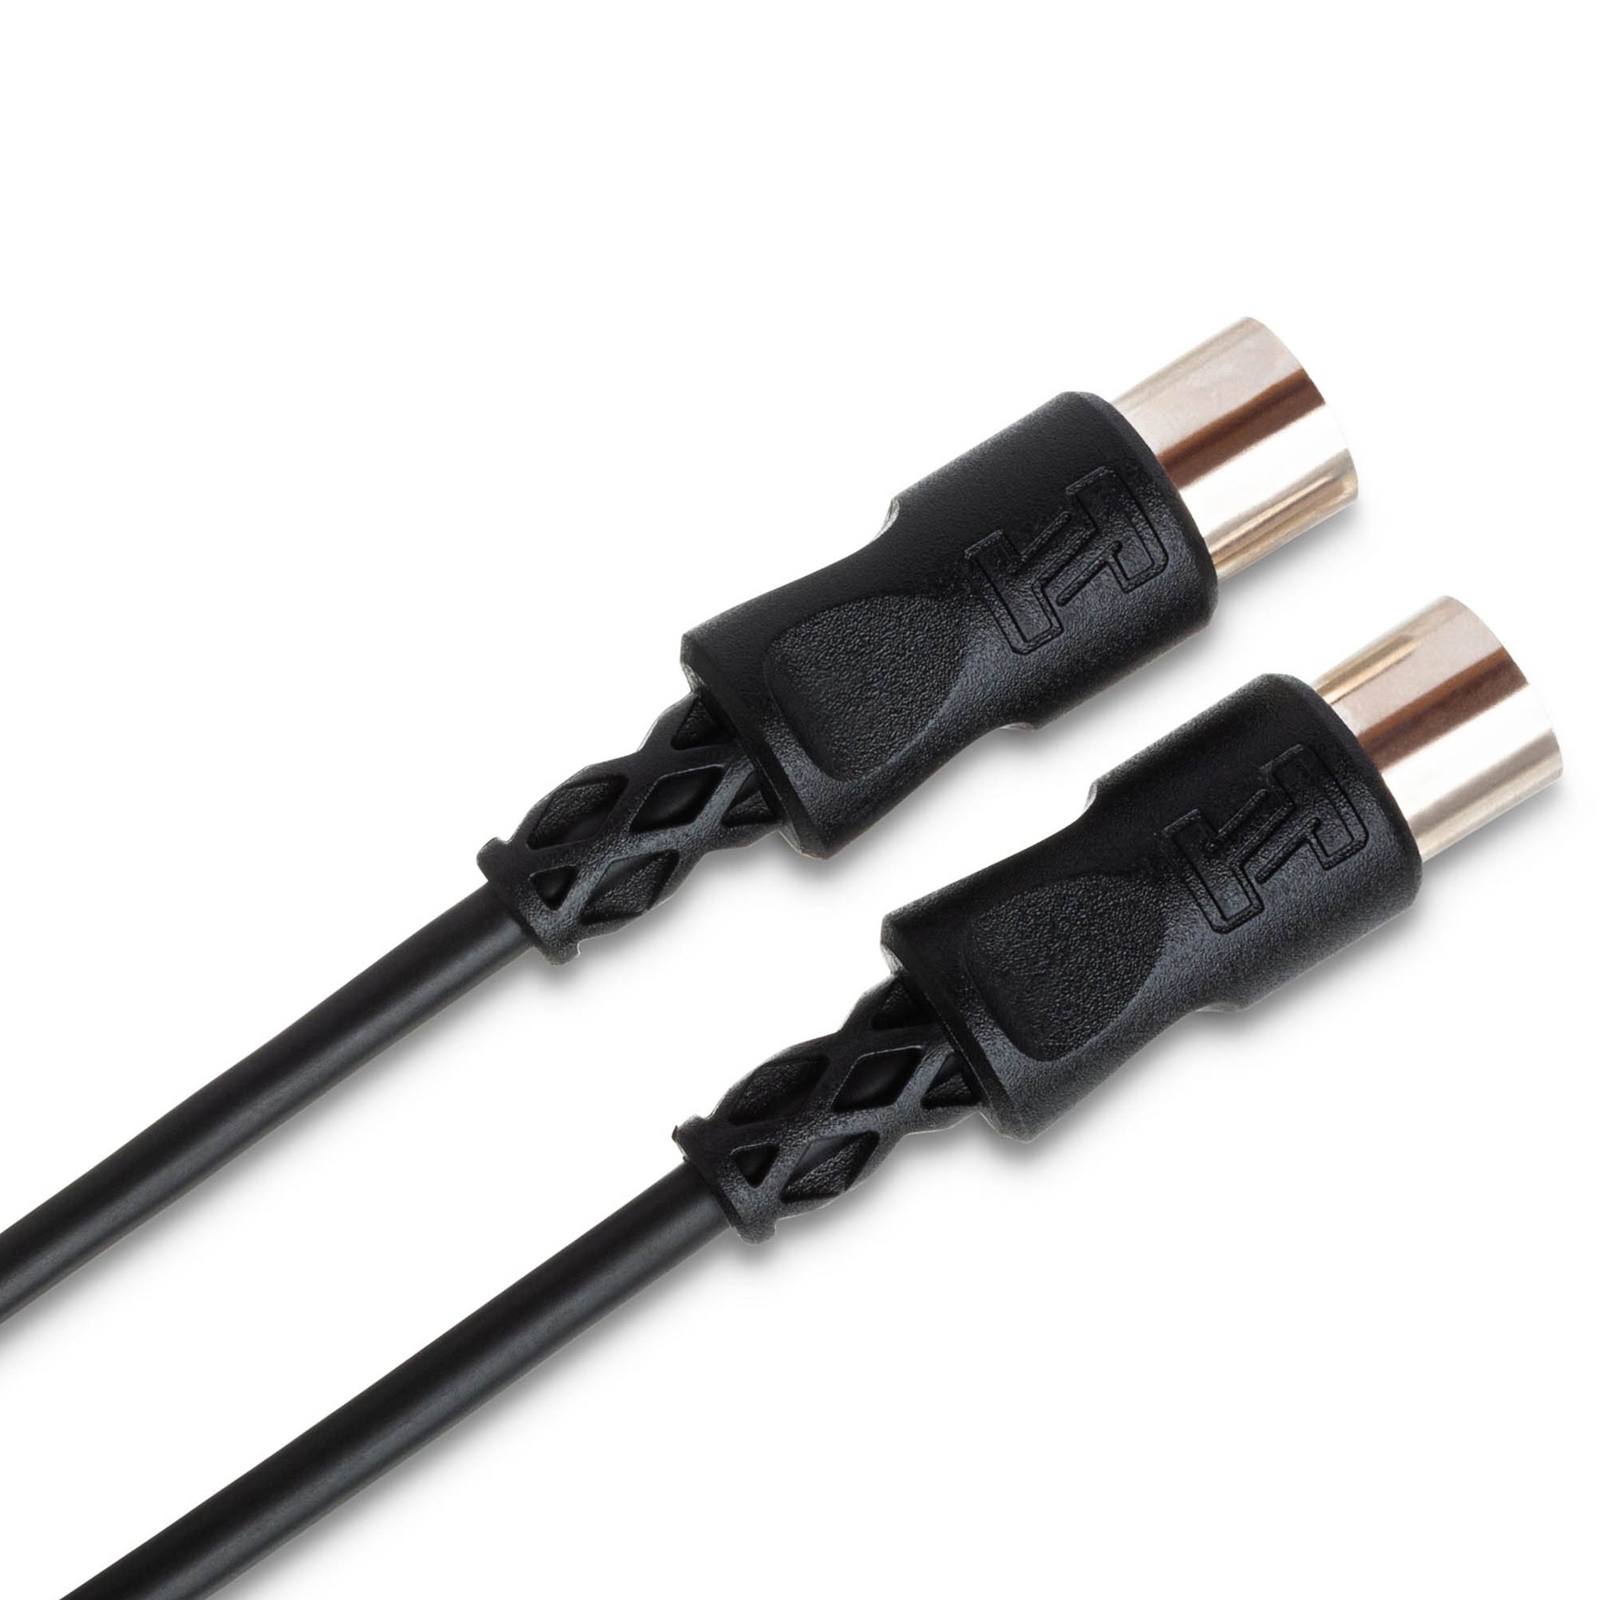 Hosa MID-303RR MIDI Cable - Right Angle to Same, 3ft